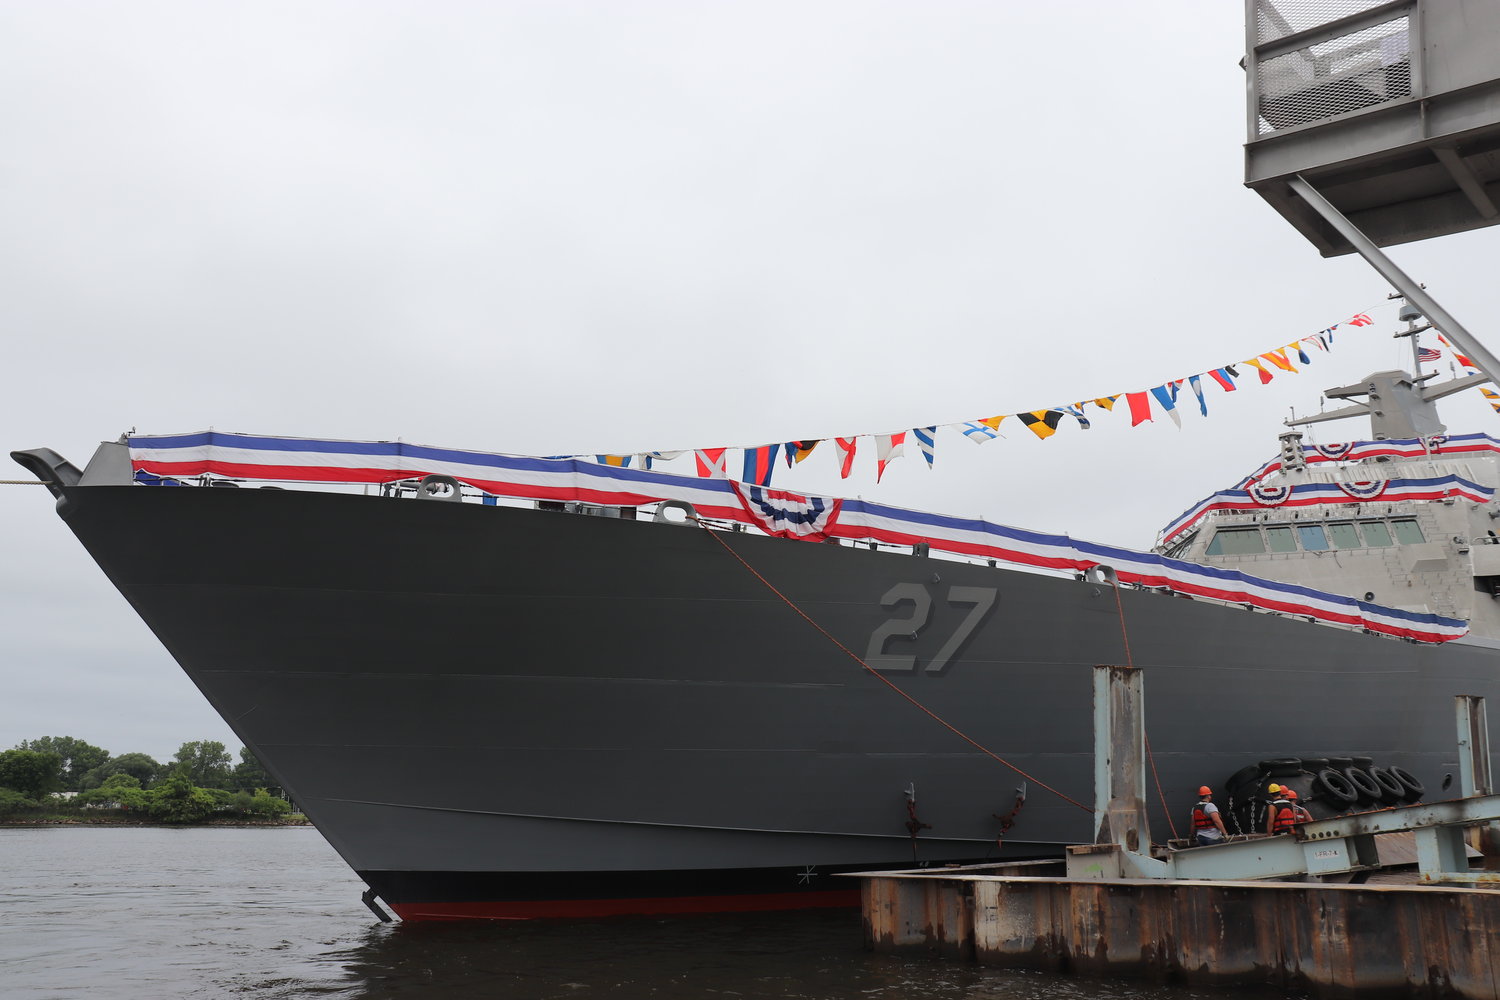 The USS Nantucket, christened in Marinette, Wis. Saturday.